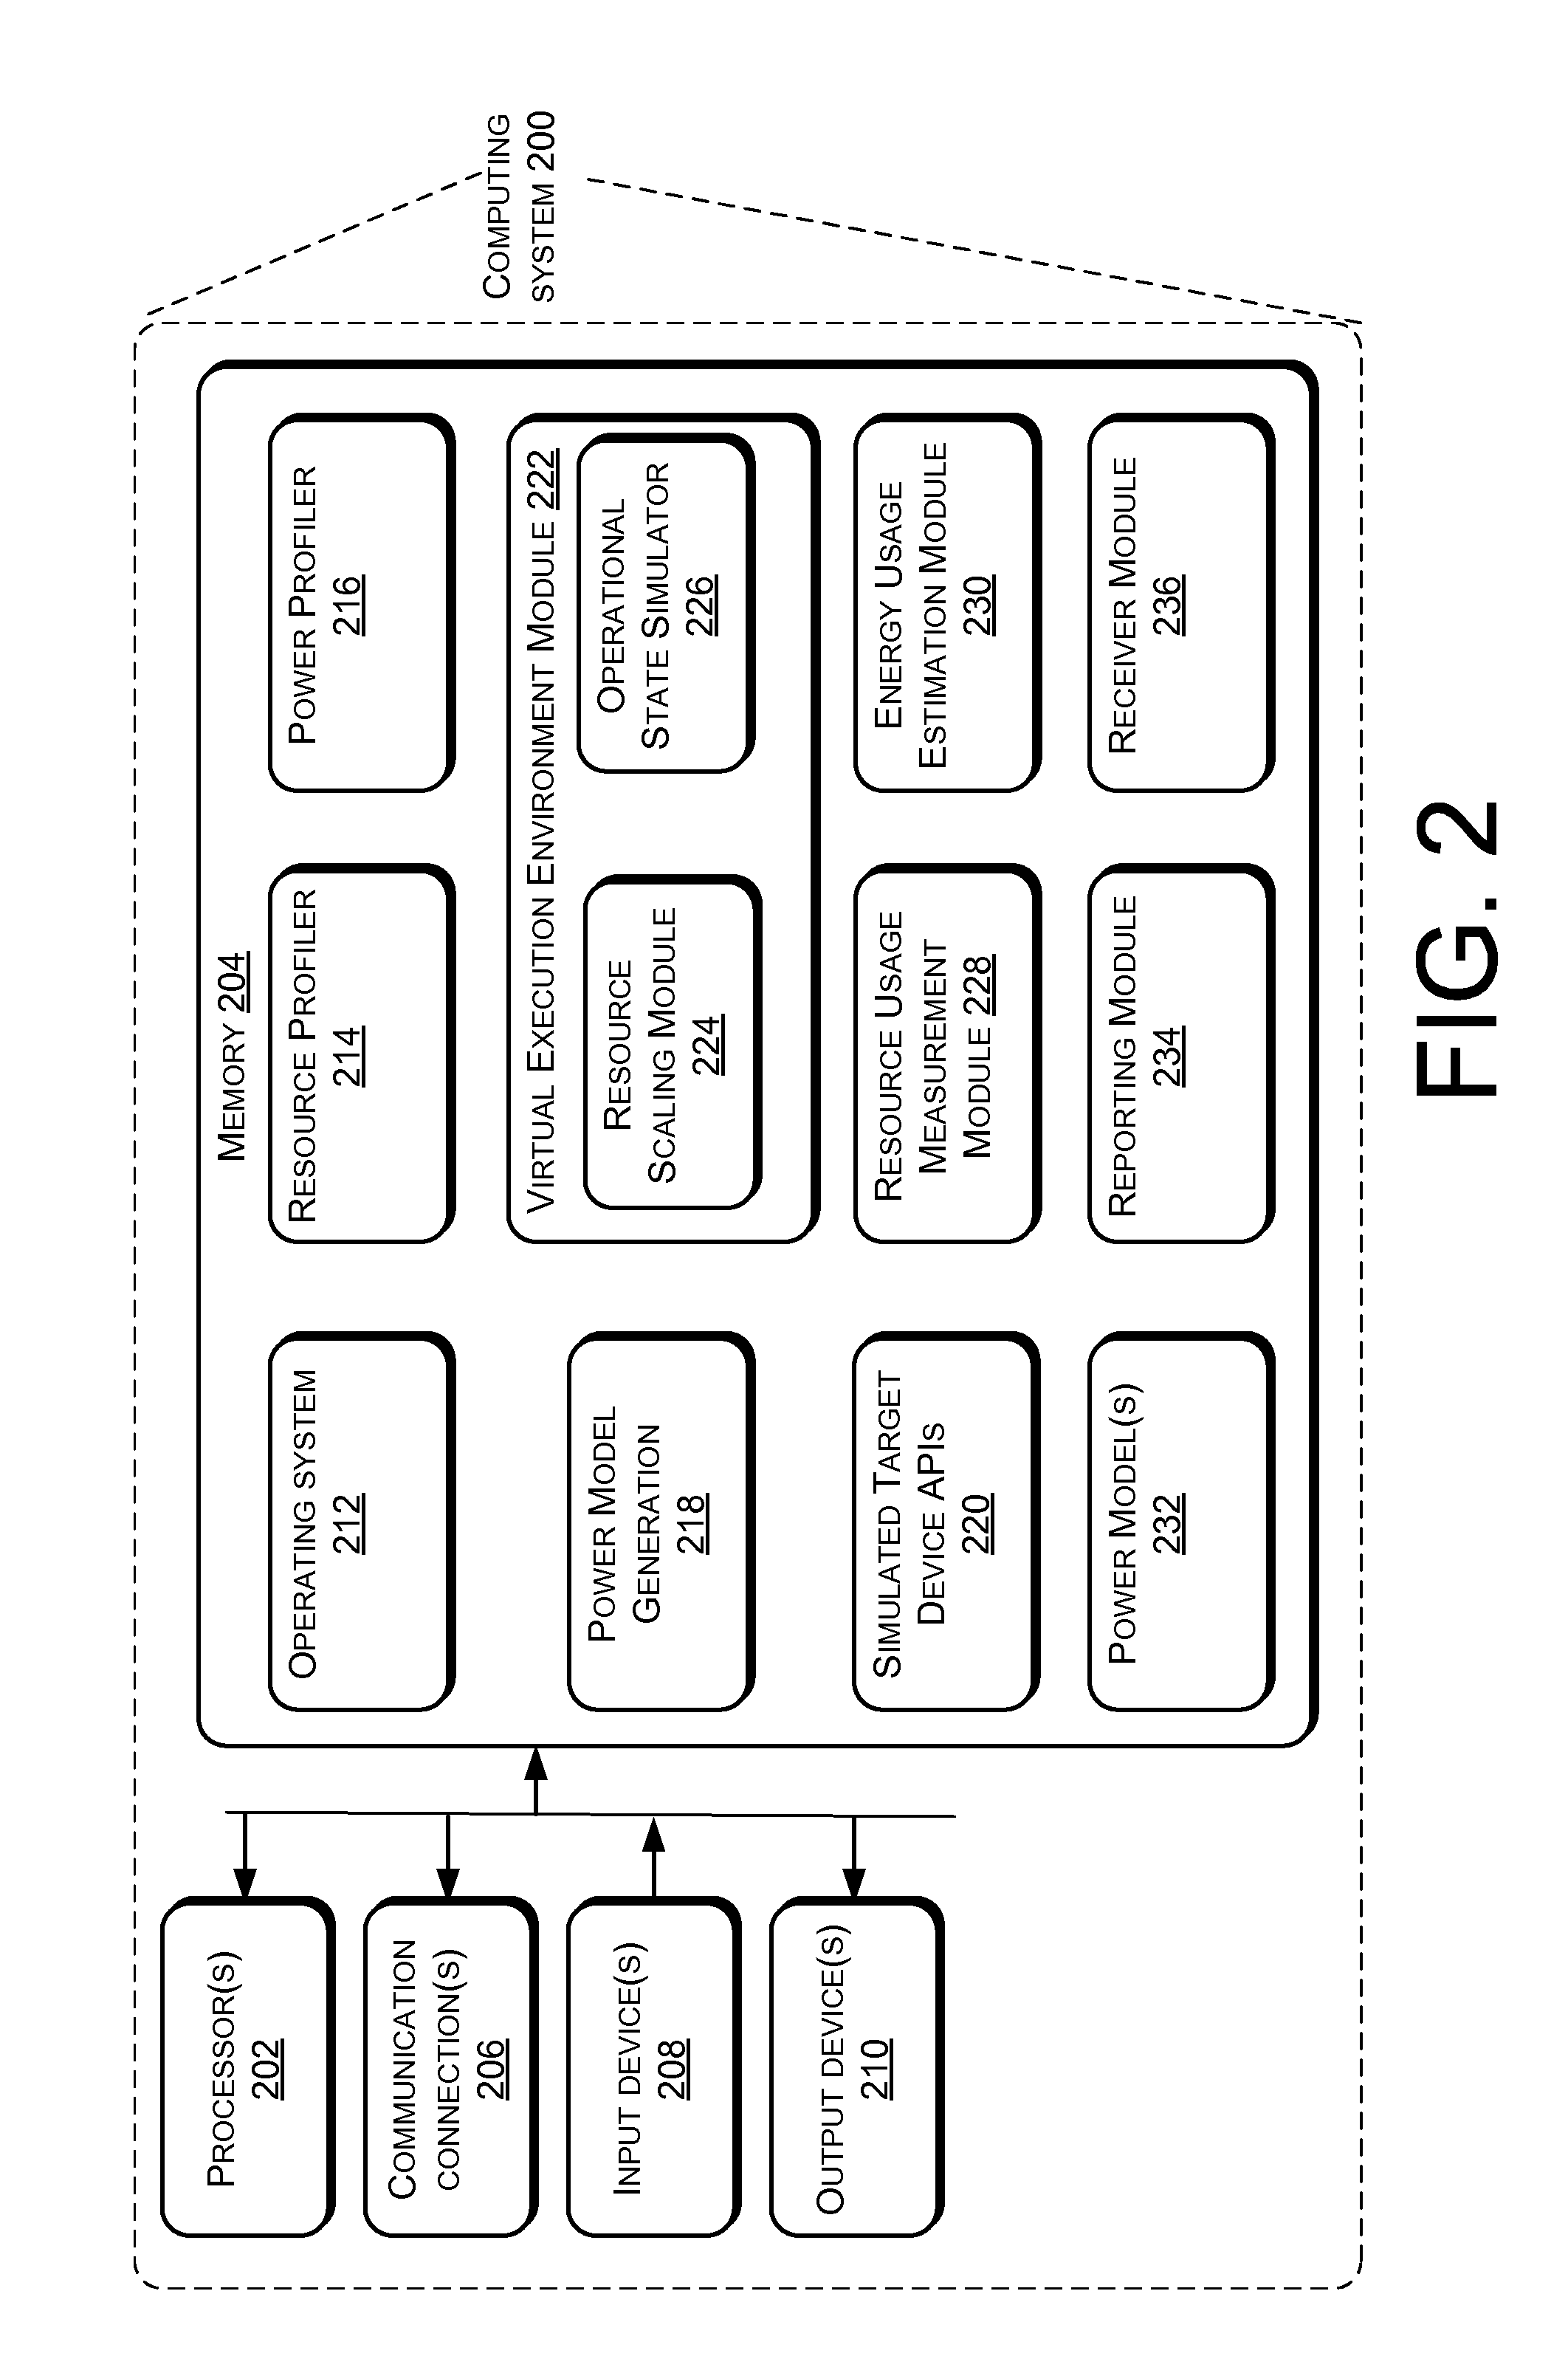 Estimating Application Energy Usage in a Target Device